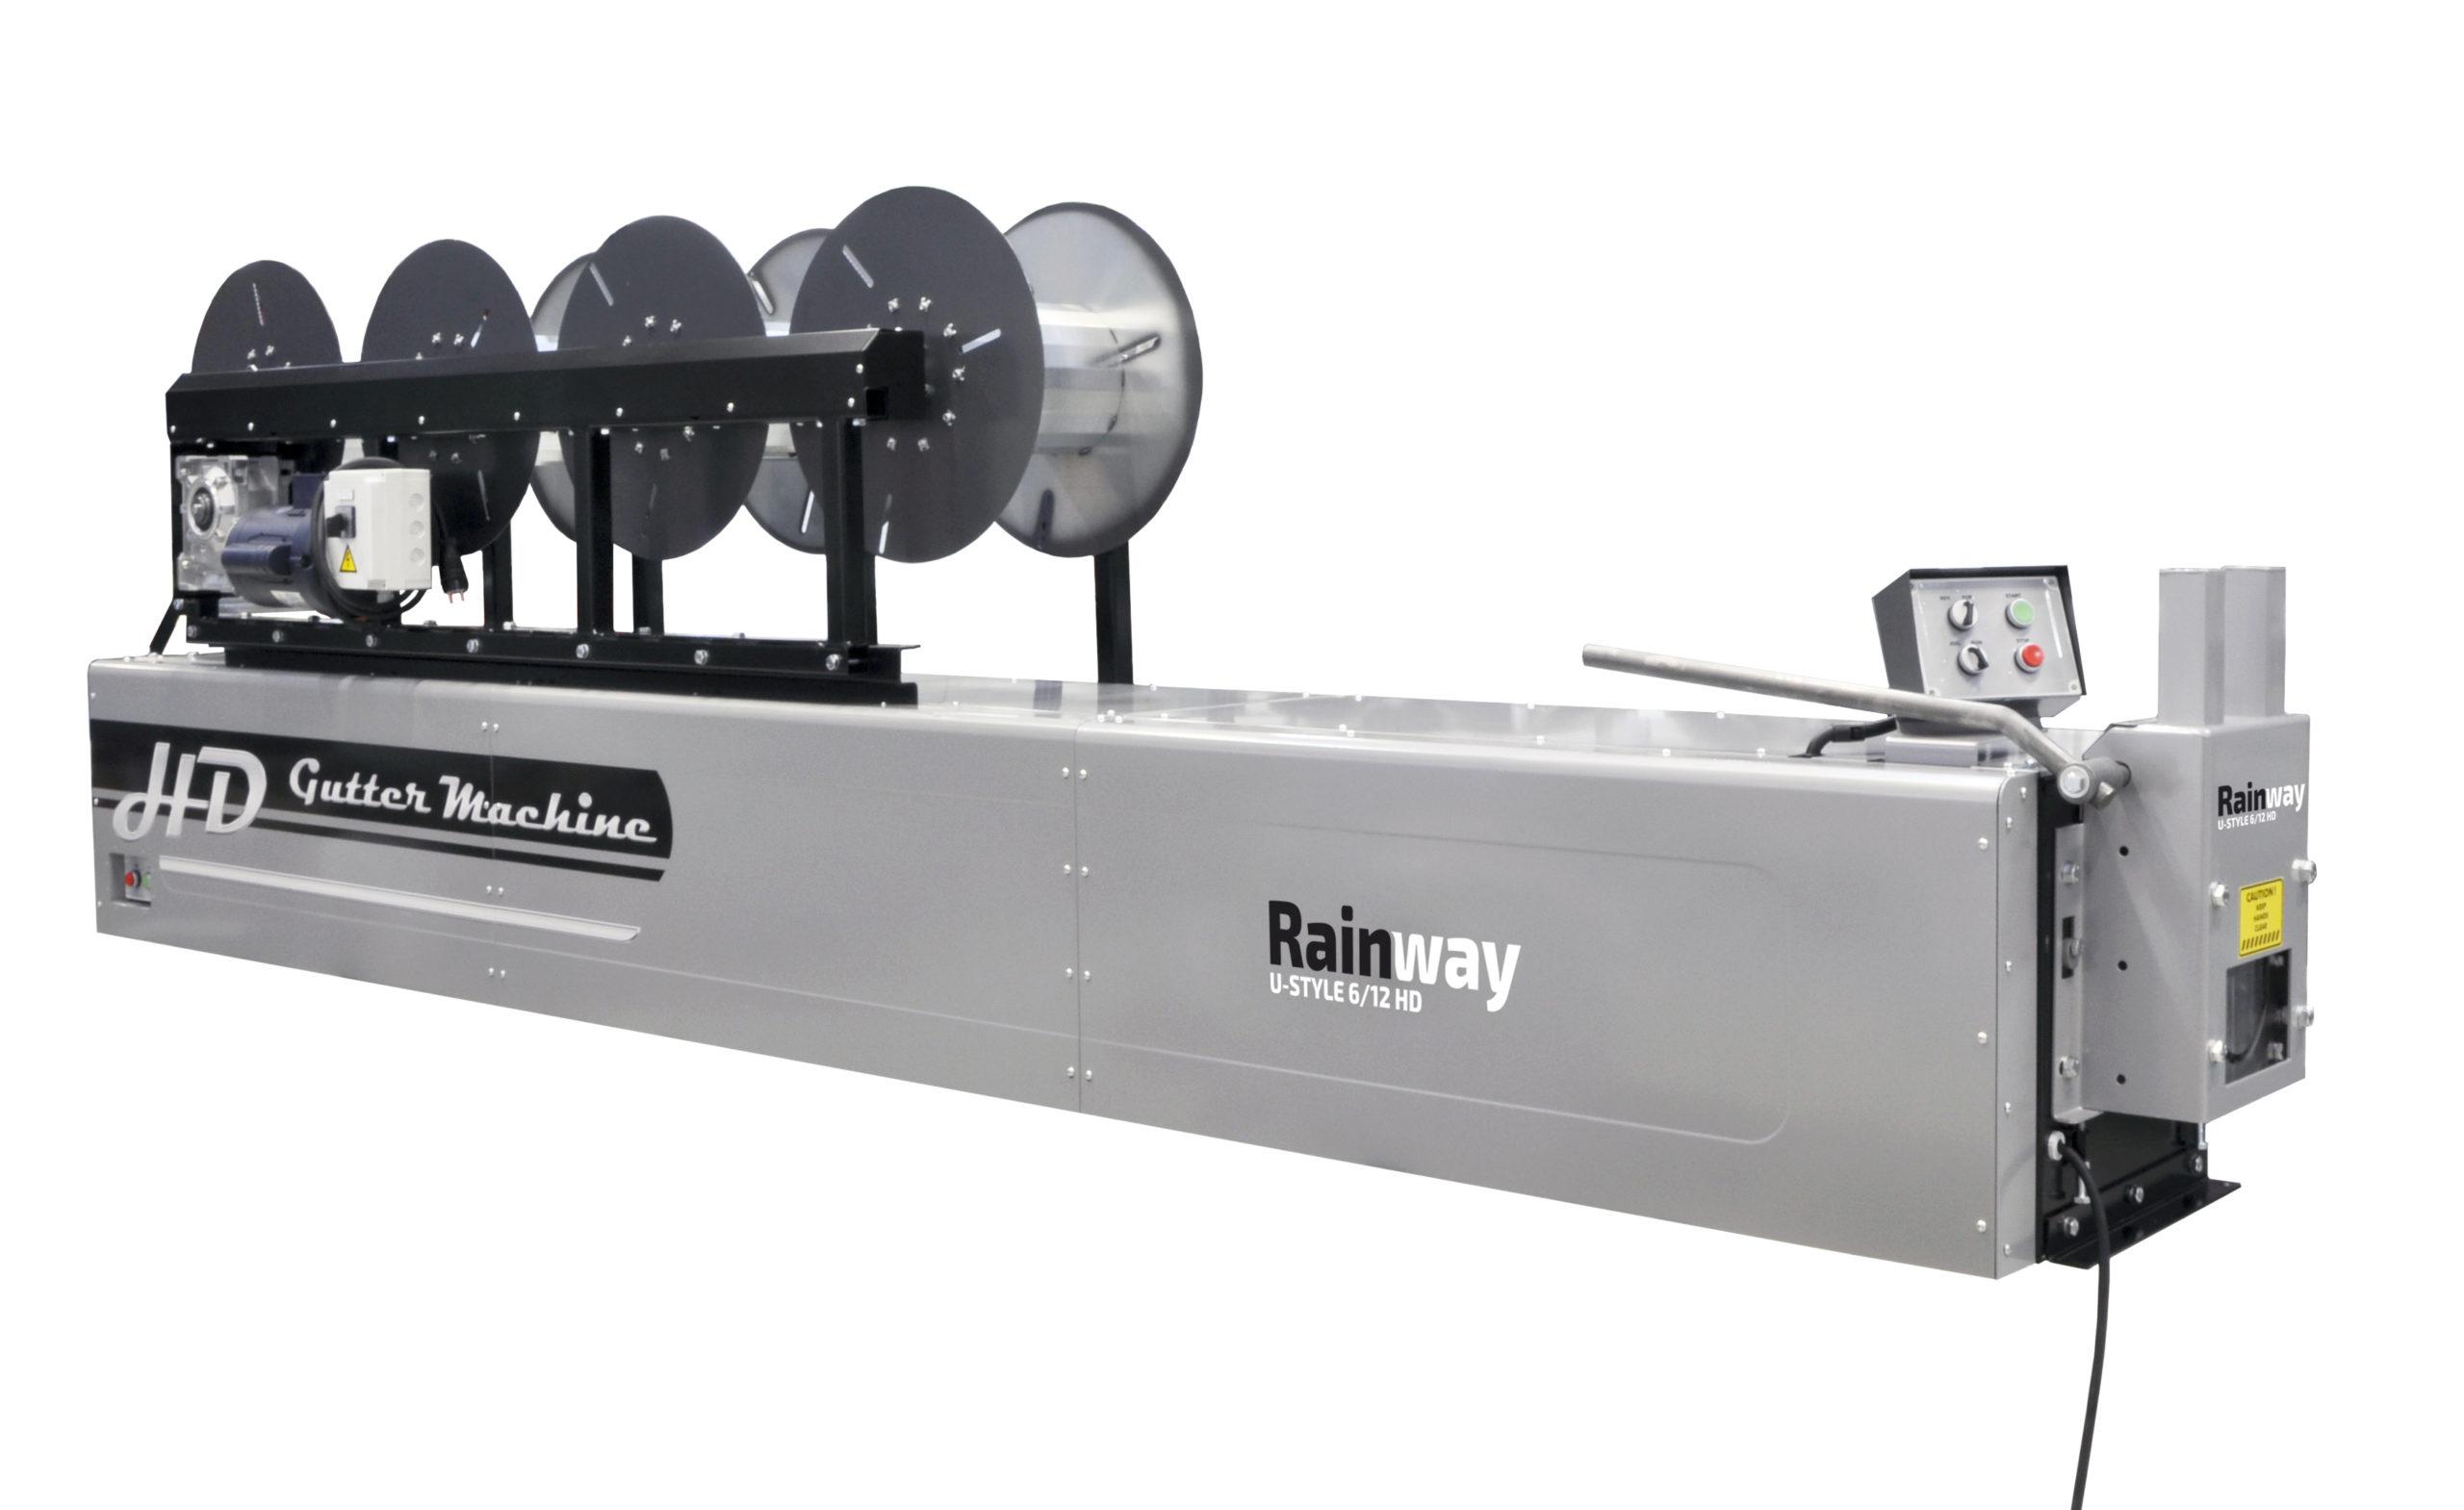 Rainway HD gutter machines are specifically designed for working with copper, aluminium and harder steels.